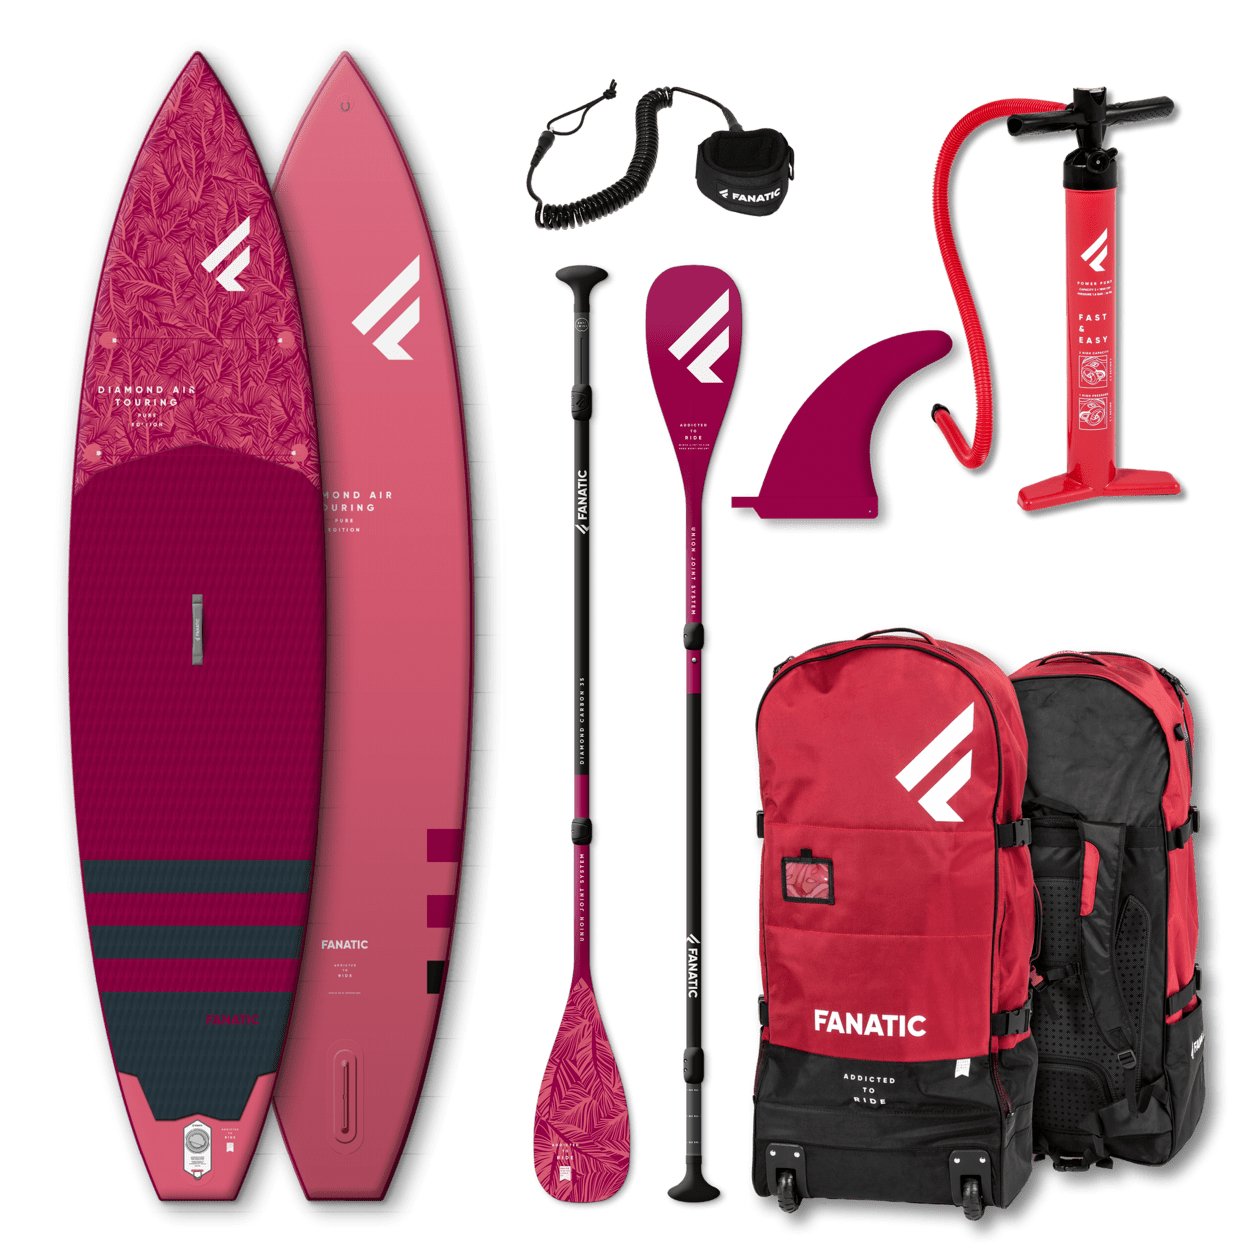 Fanatic Package Diamond Air Touring 2022 iSUP Paddleboard - Worthing Watersports - 9008415938568 - iSUP Packages - Fanatic SUP